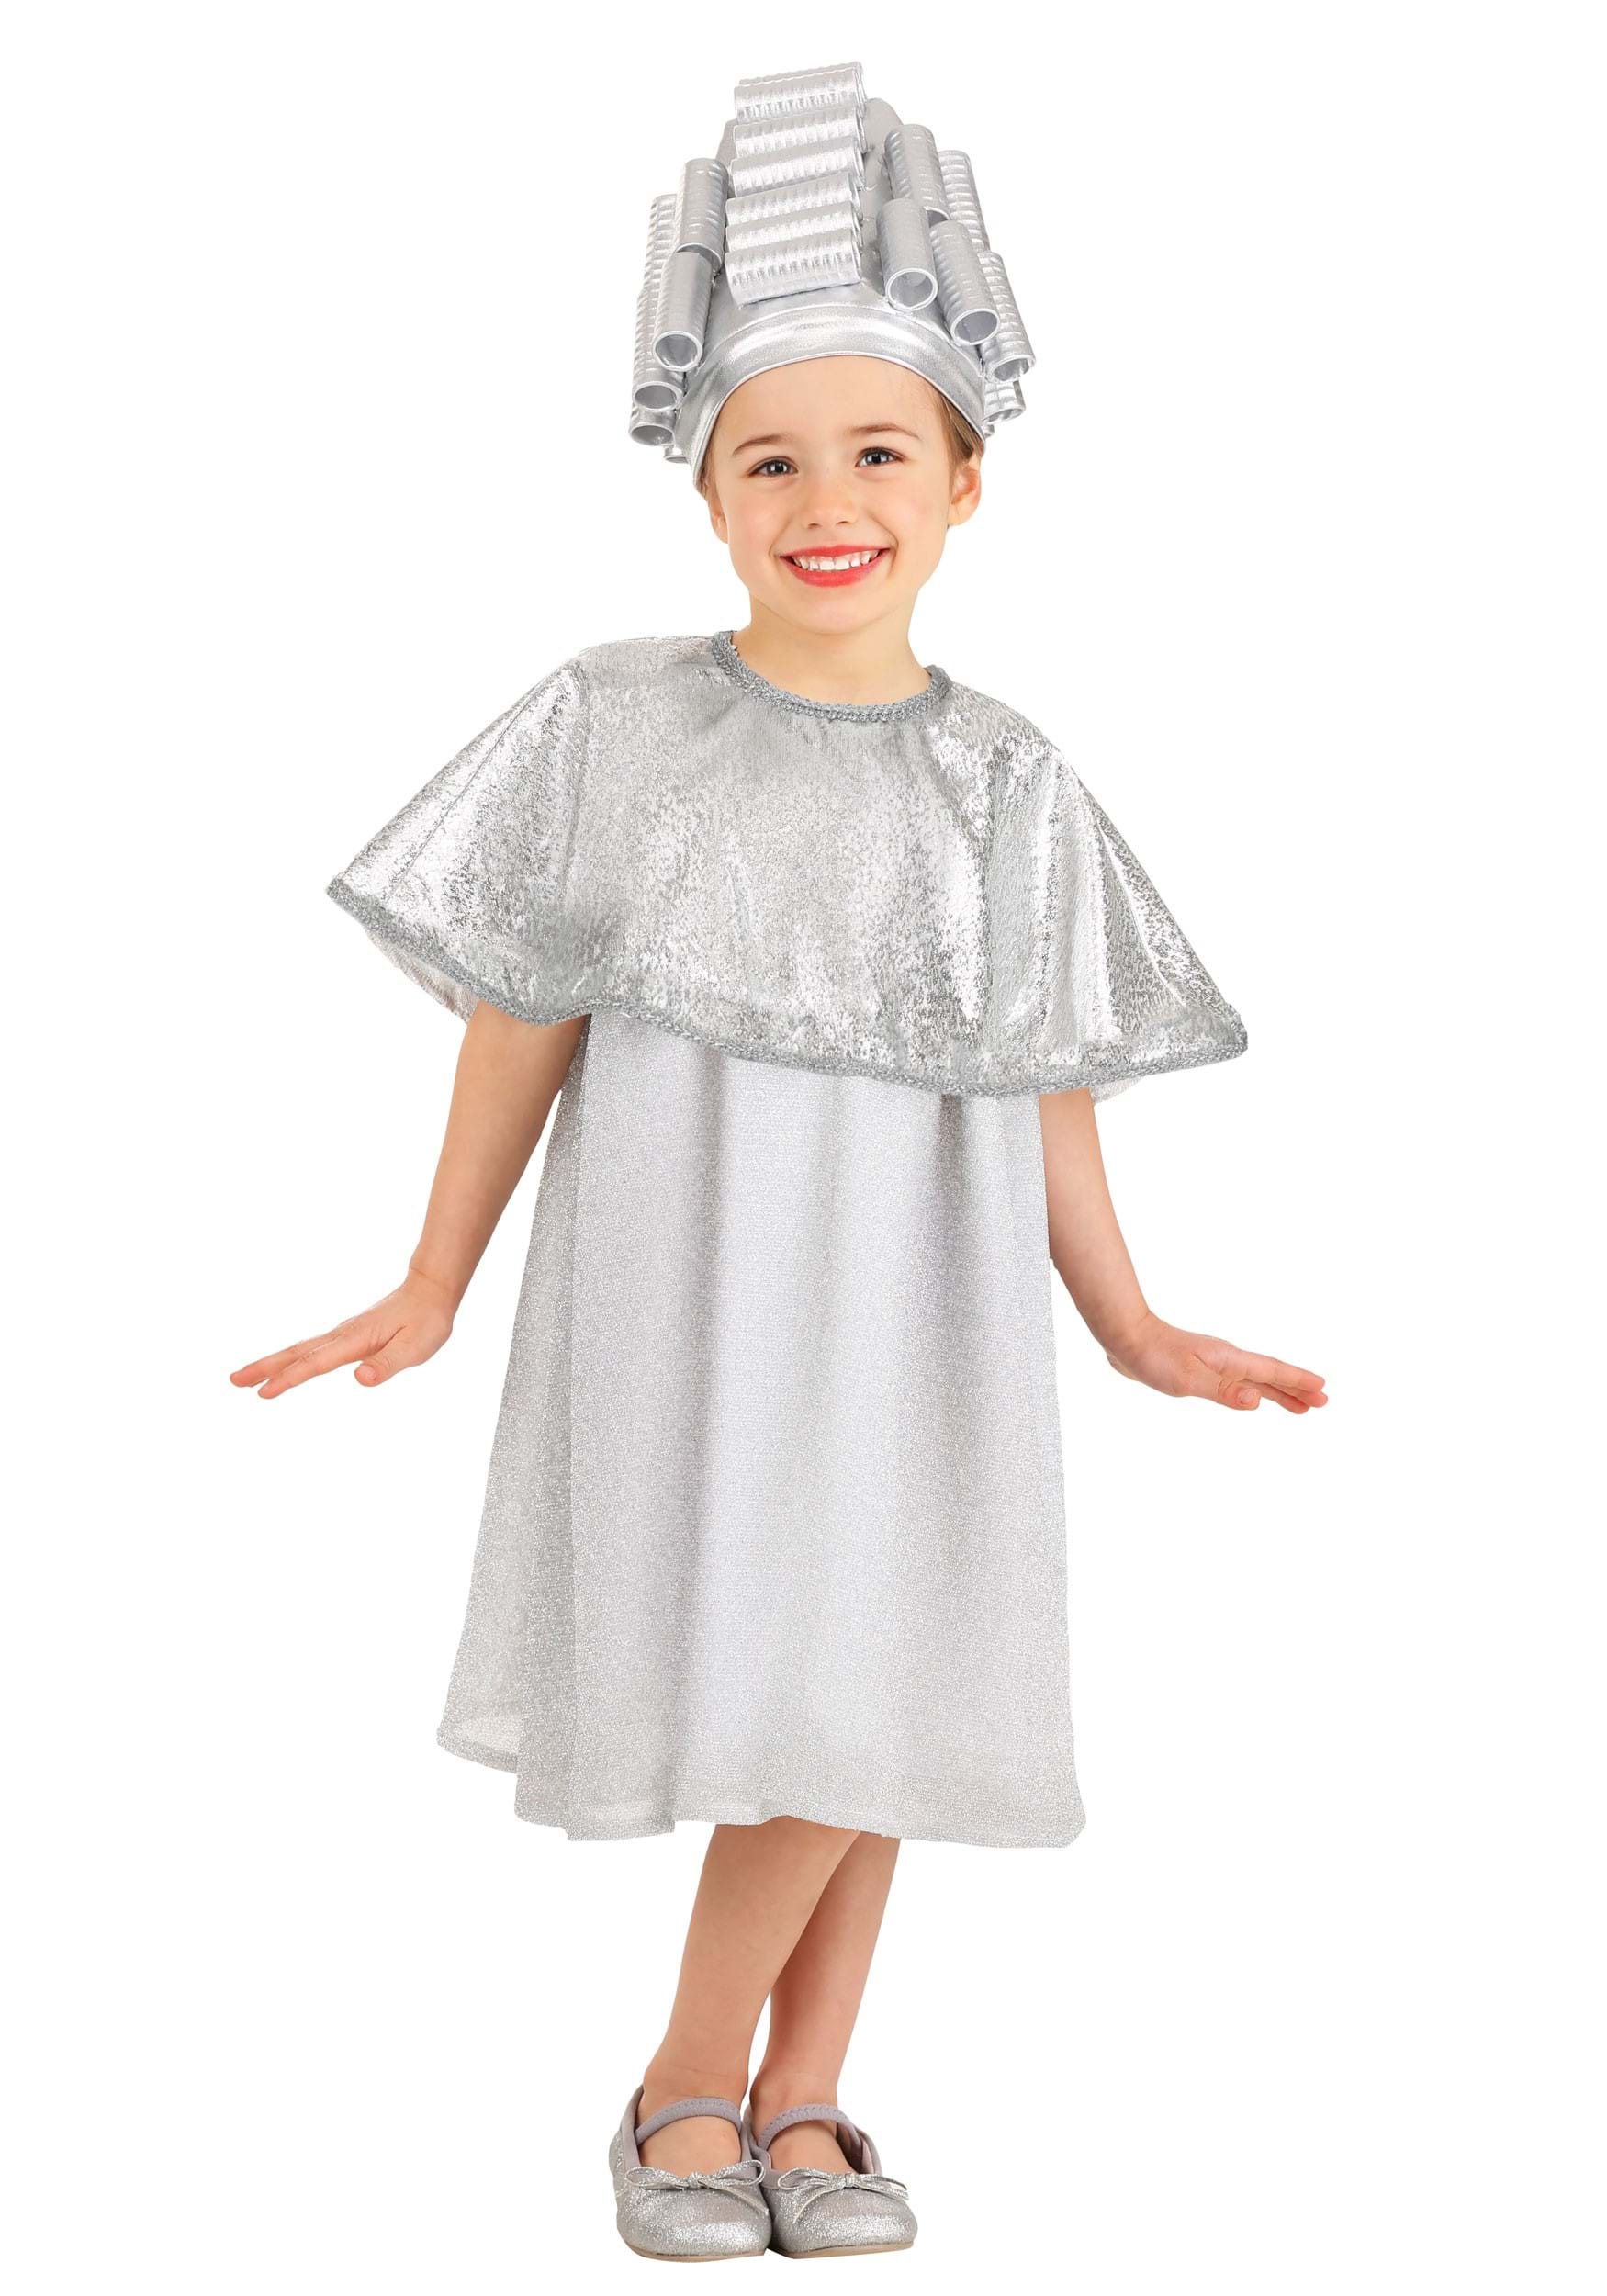 Photos - Fancy Dress Toddler FUN Costumes Beauty School Dropout  Costume Gray 